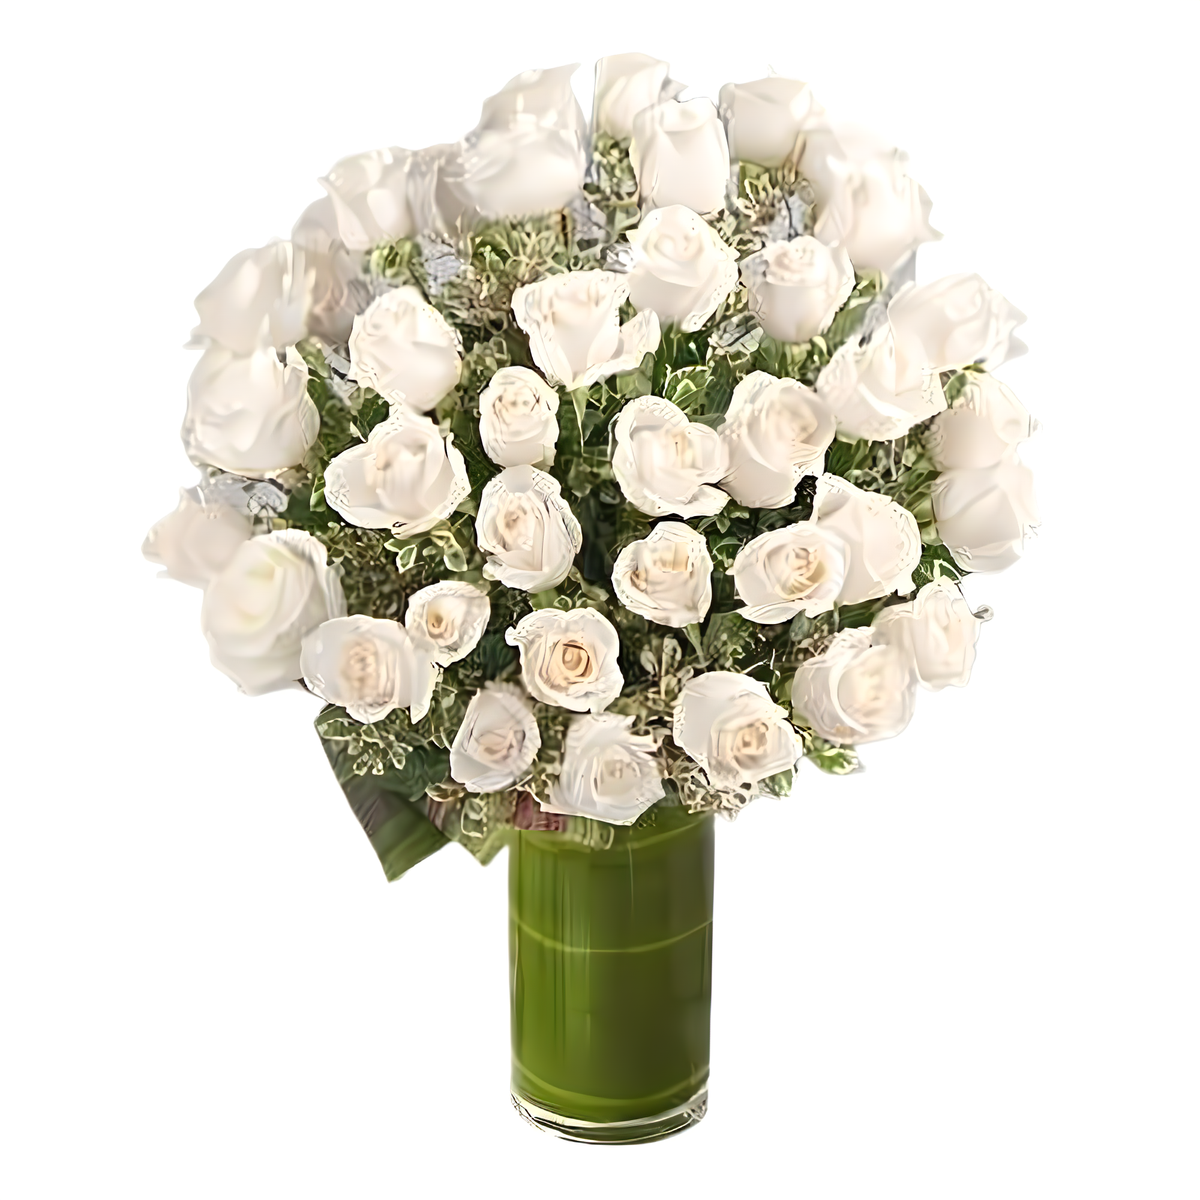 Luxury Rose Bouquet - 48 Premium White Long Stem Roses - Products &gt; Luxury Collection